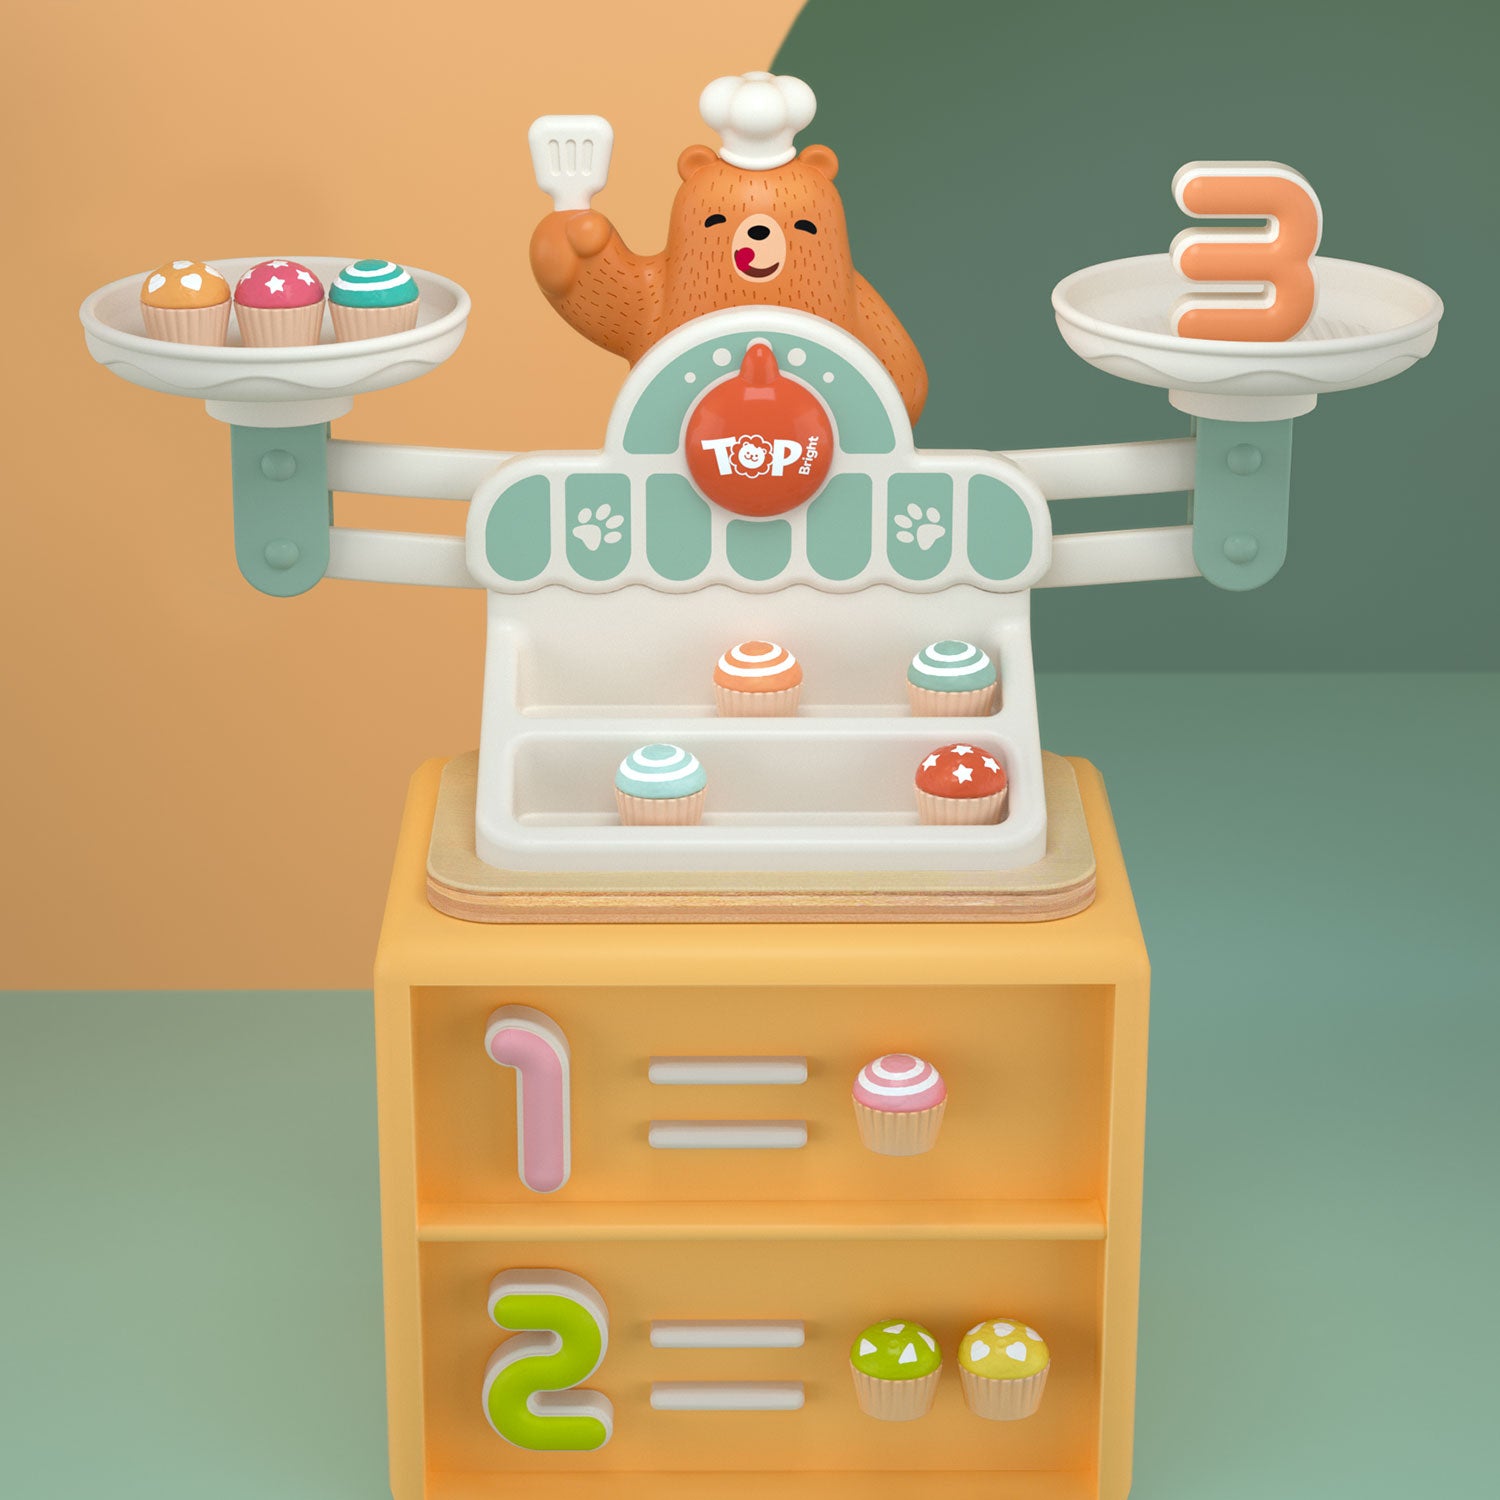 Yummy Bear 123 Scale - Teach Your Kids To Use A Scale! - Equilibrio de pesos